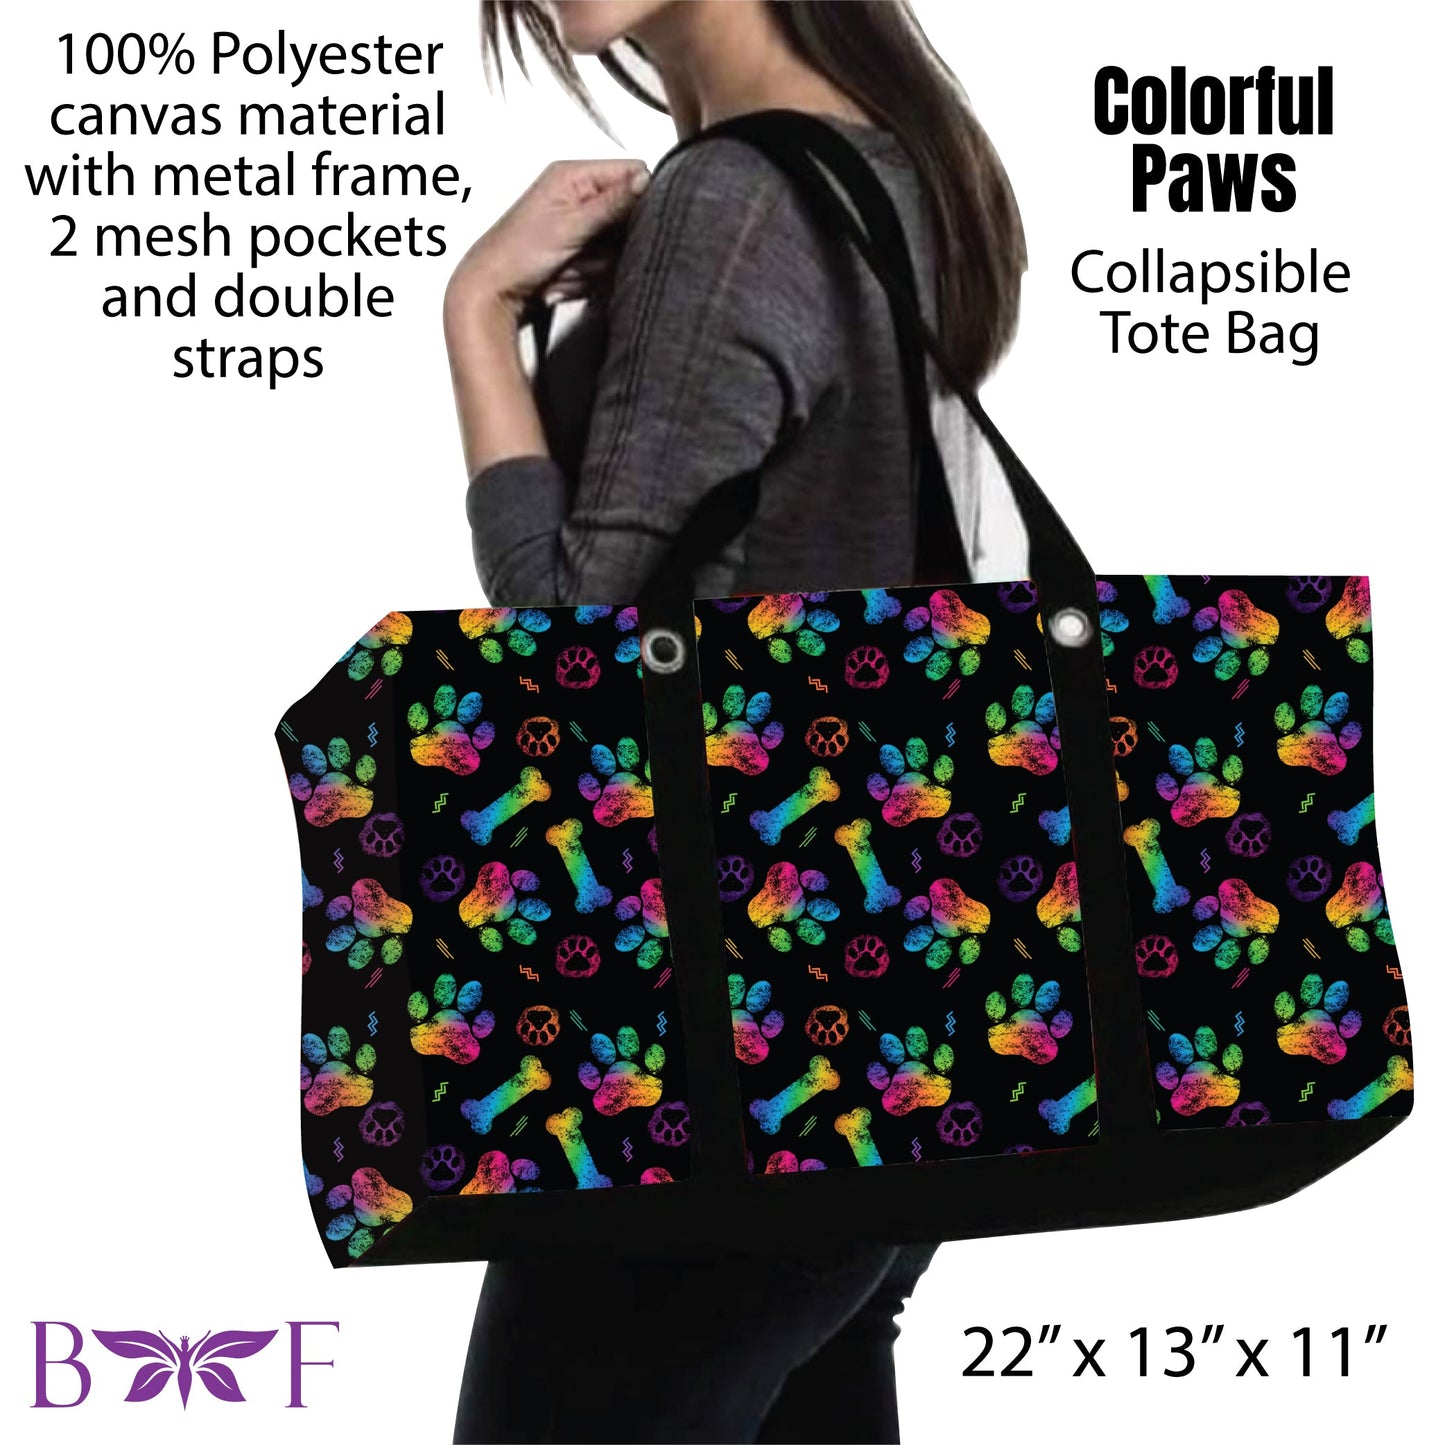 Colorful Paws tote and 2 inside mesh pockets